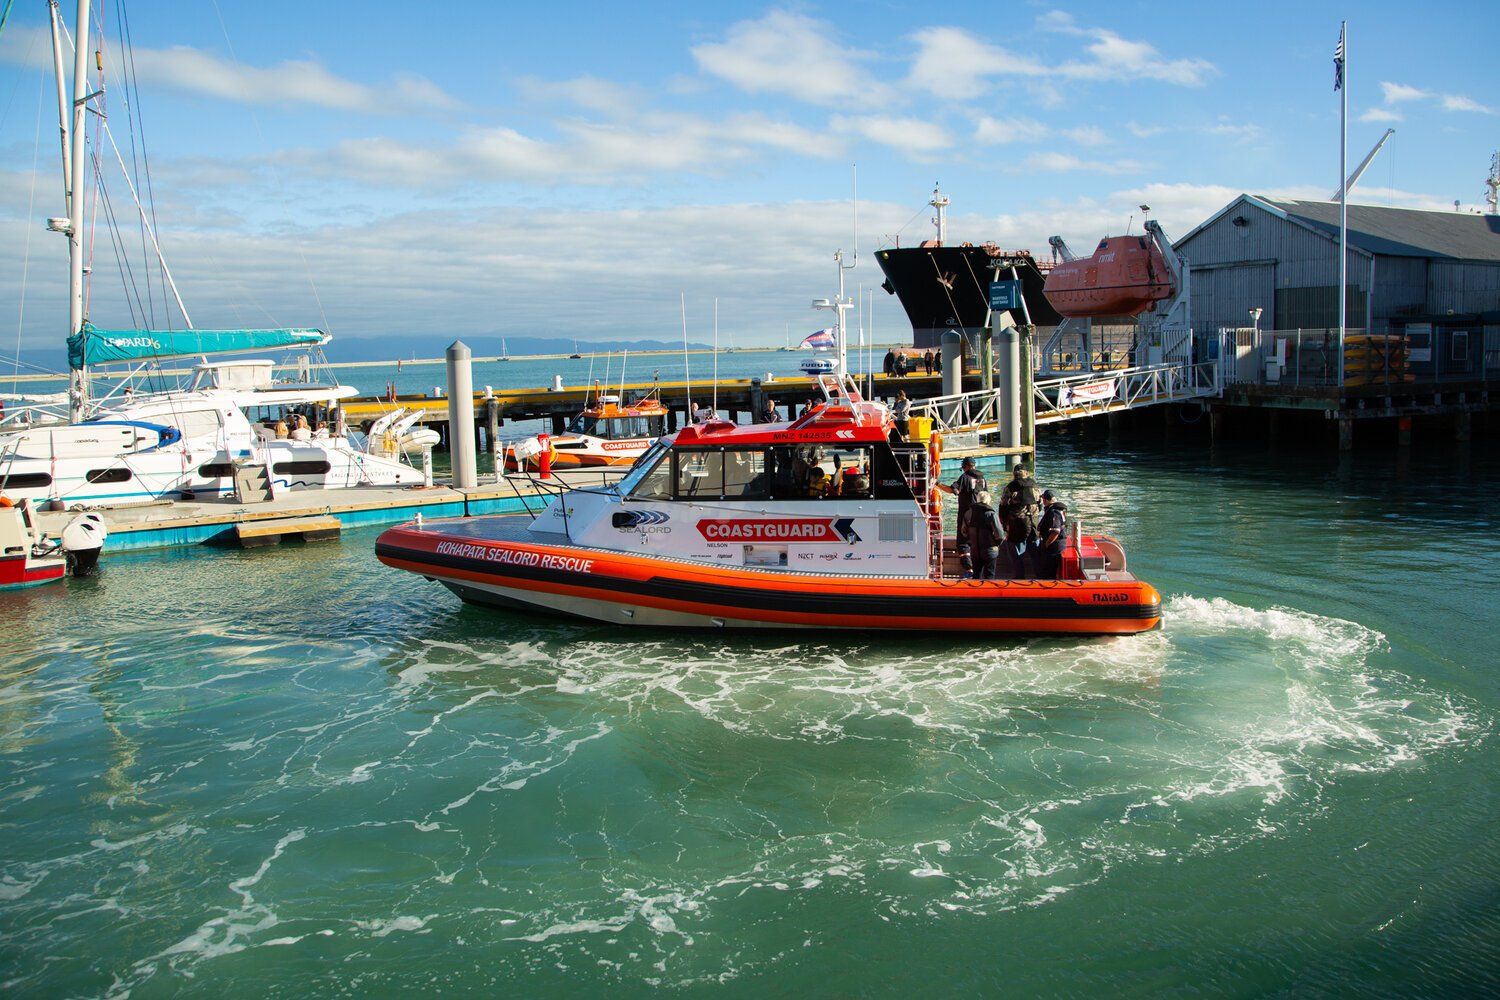 The Sealord Rescue vessel at the jetty